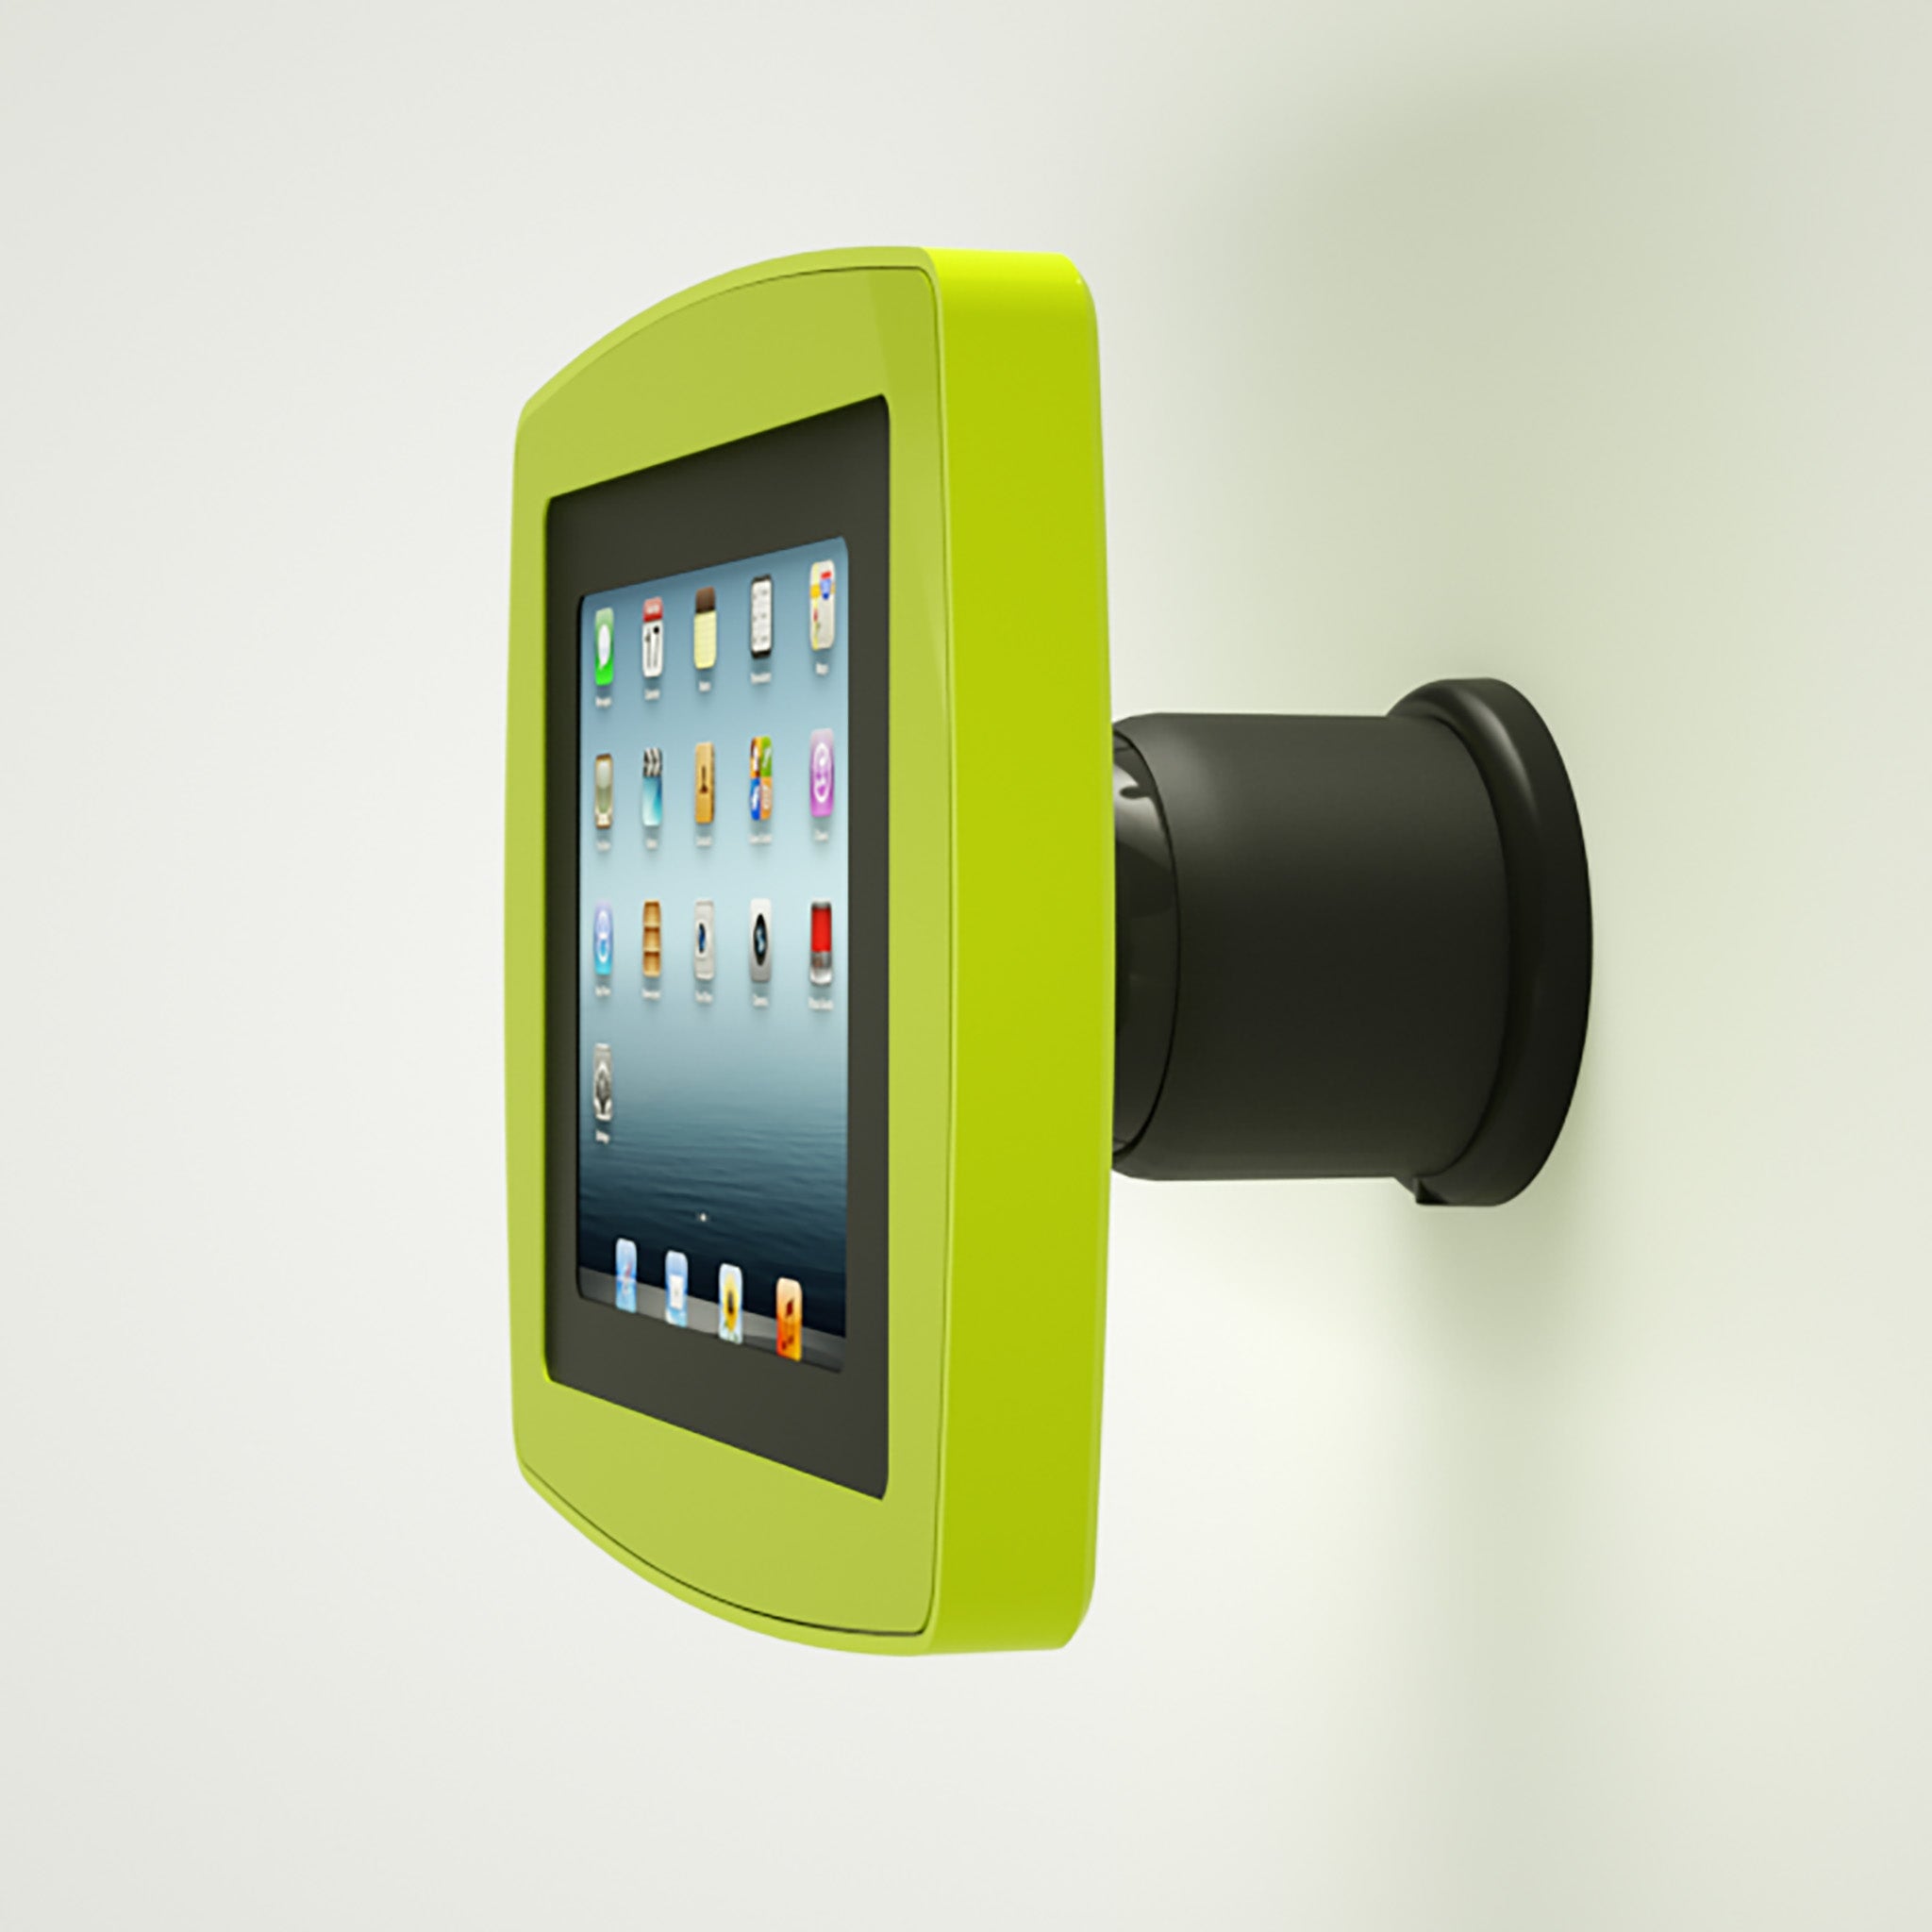 Armodilo Tilt Wall Mounted iPad & Tablet Enclosure in lime green